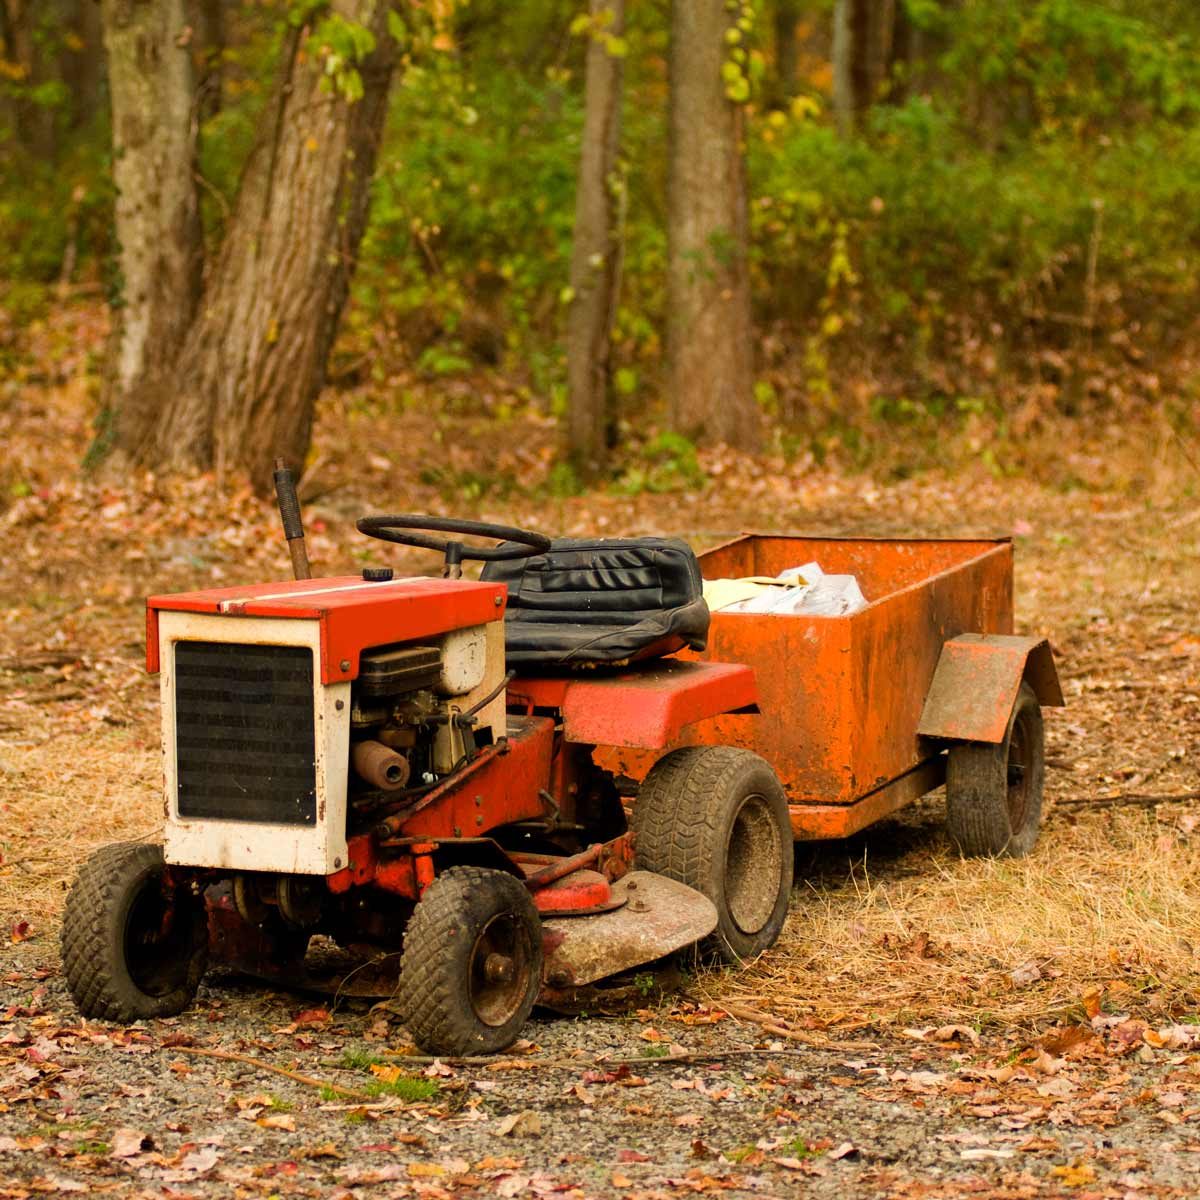 10 Vintage Lawn Mowers You Just Have to See